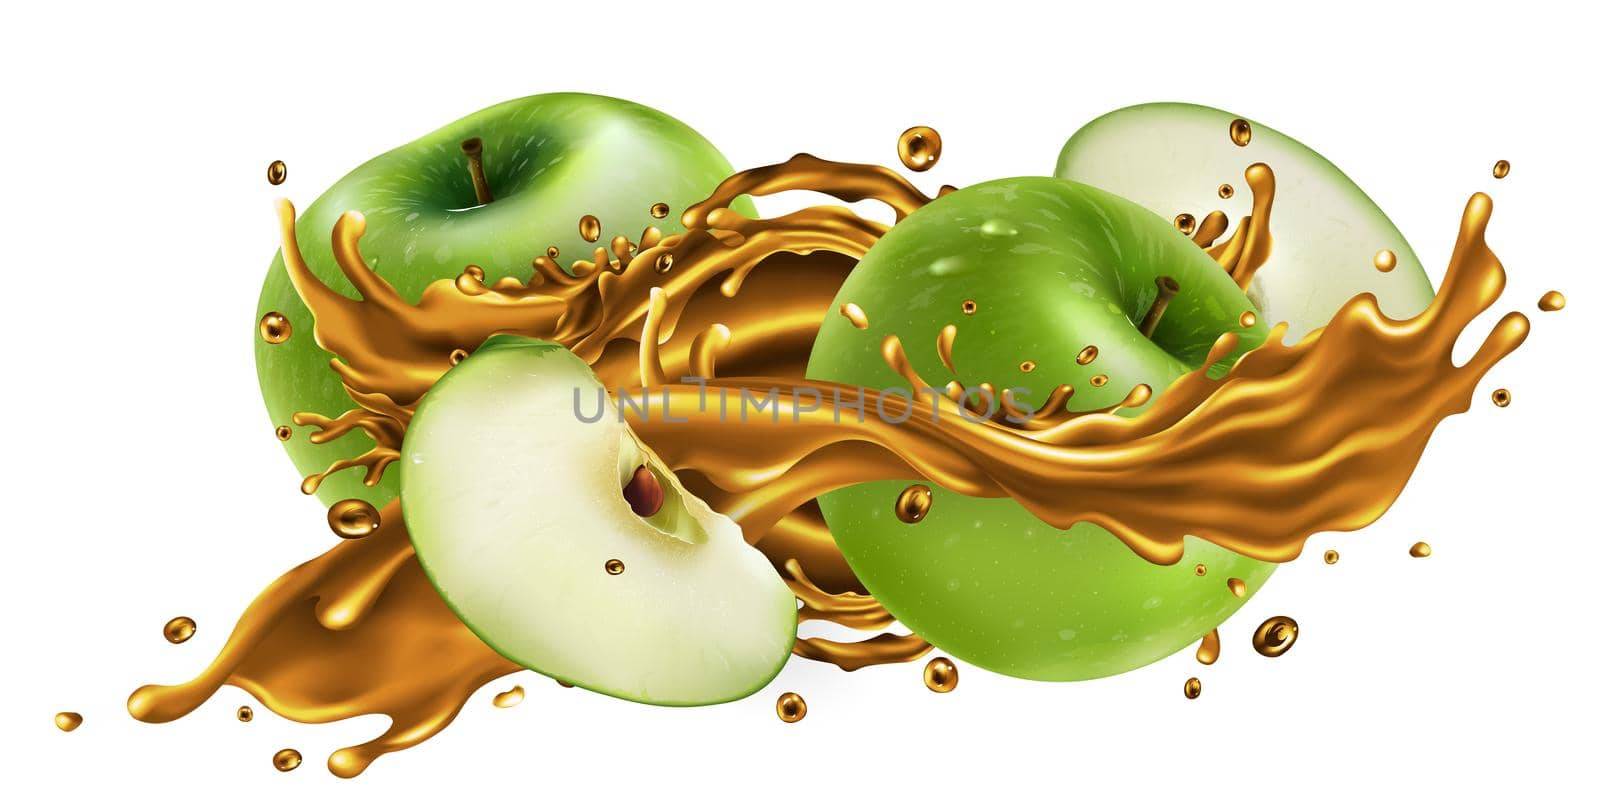 Whole and sliced green apples and a splash of fruit juice on a white background. Realistic style illustration.